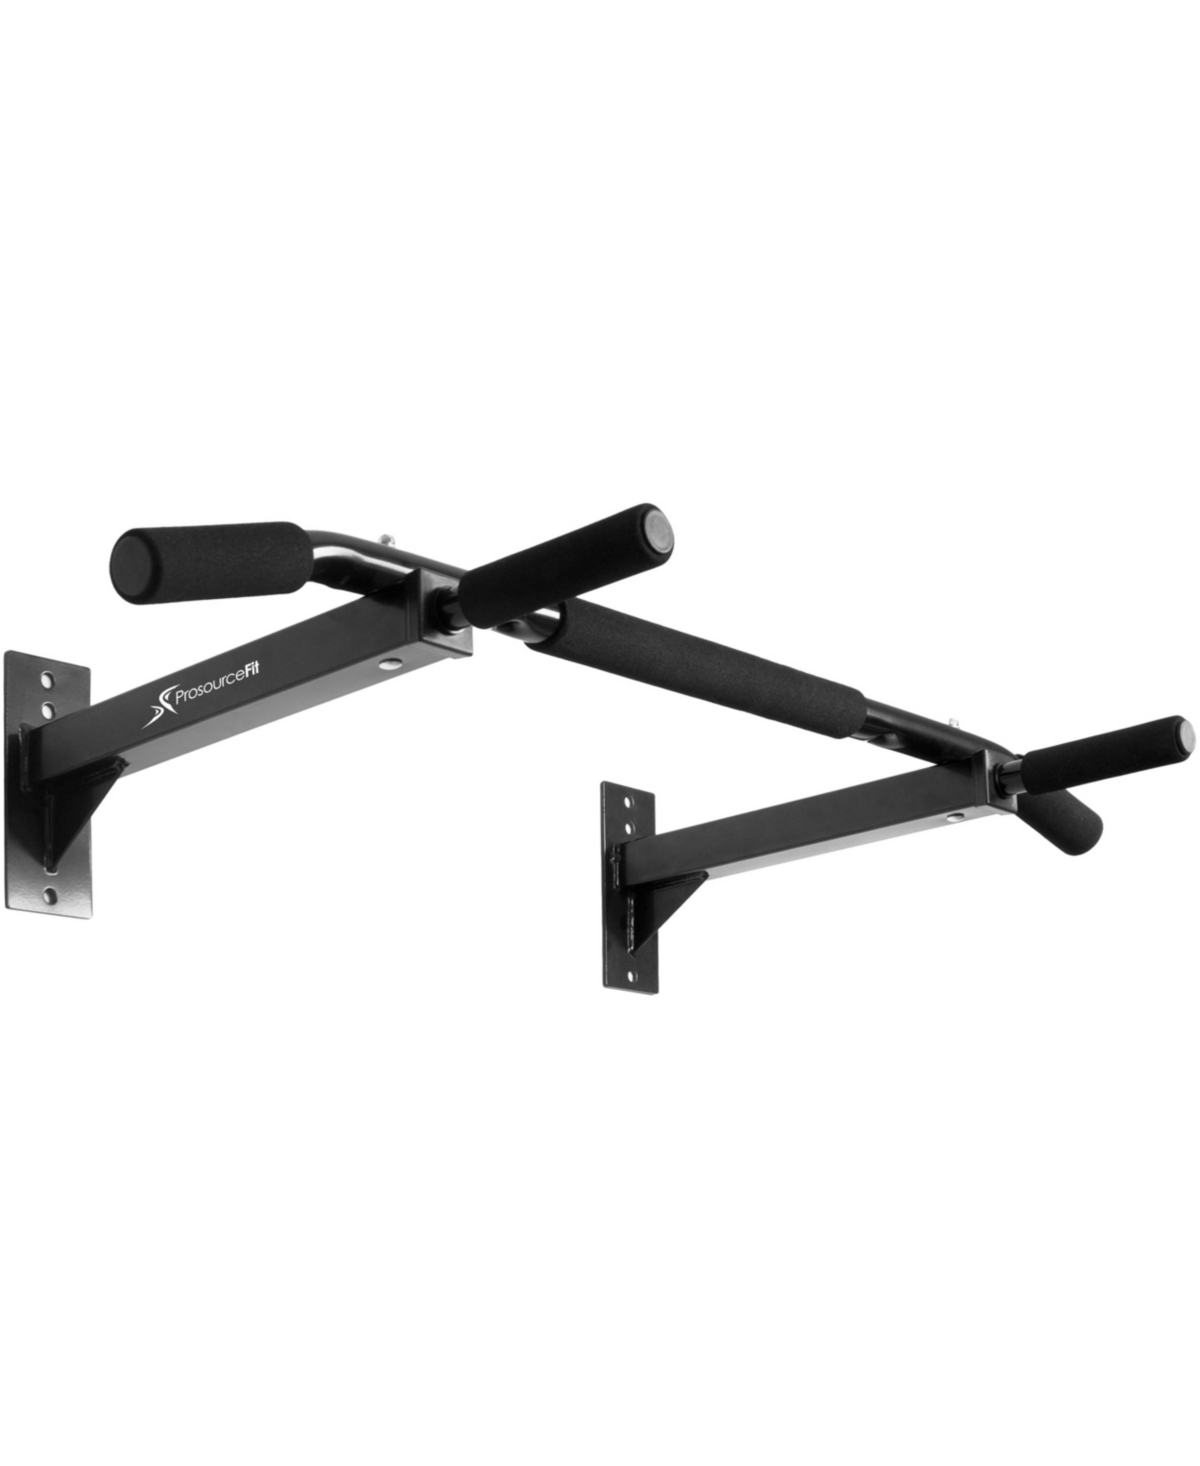 Wall Mount Pull-Up Bar - Black